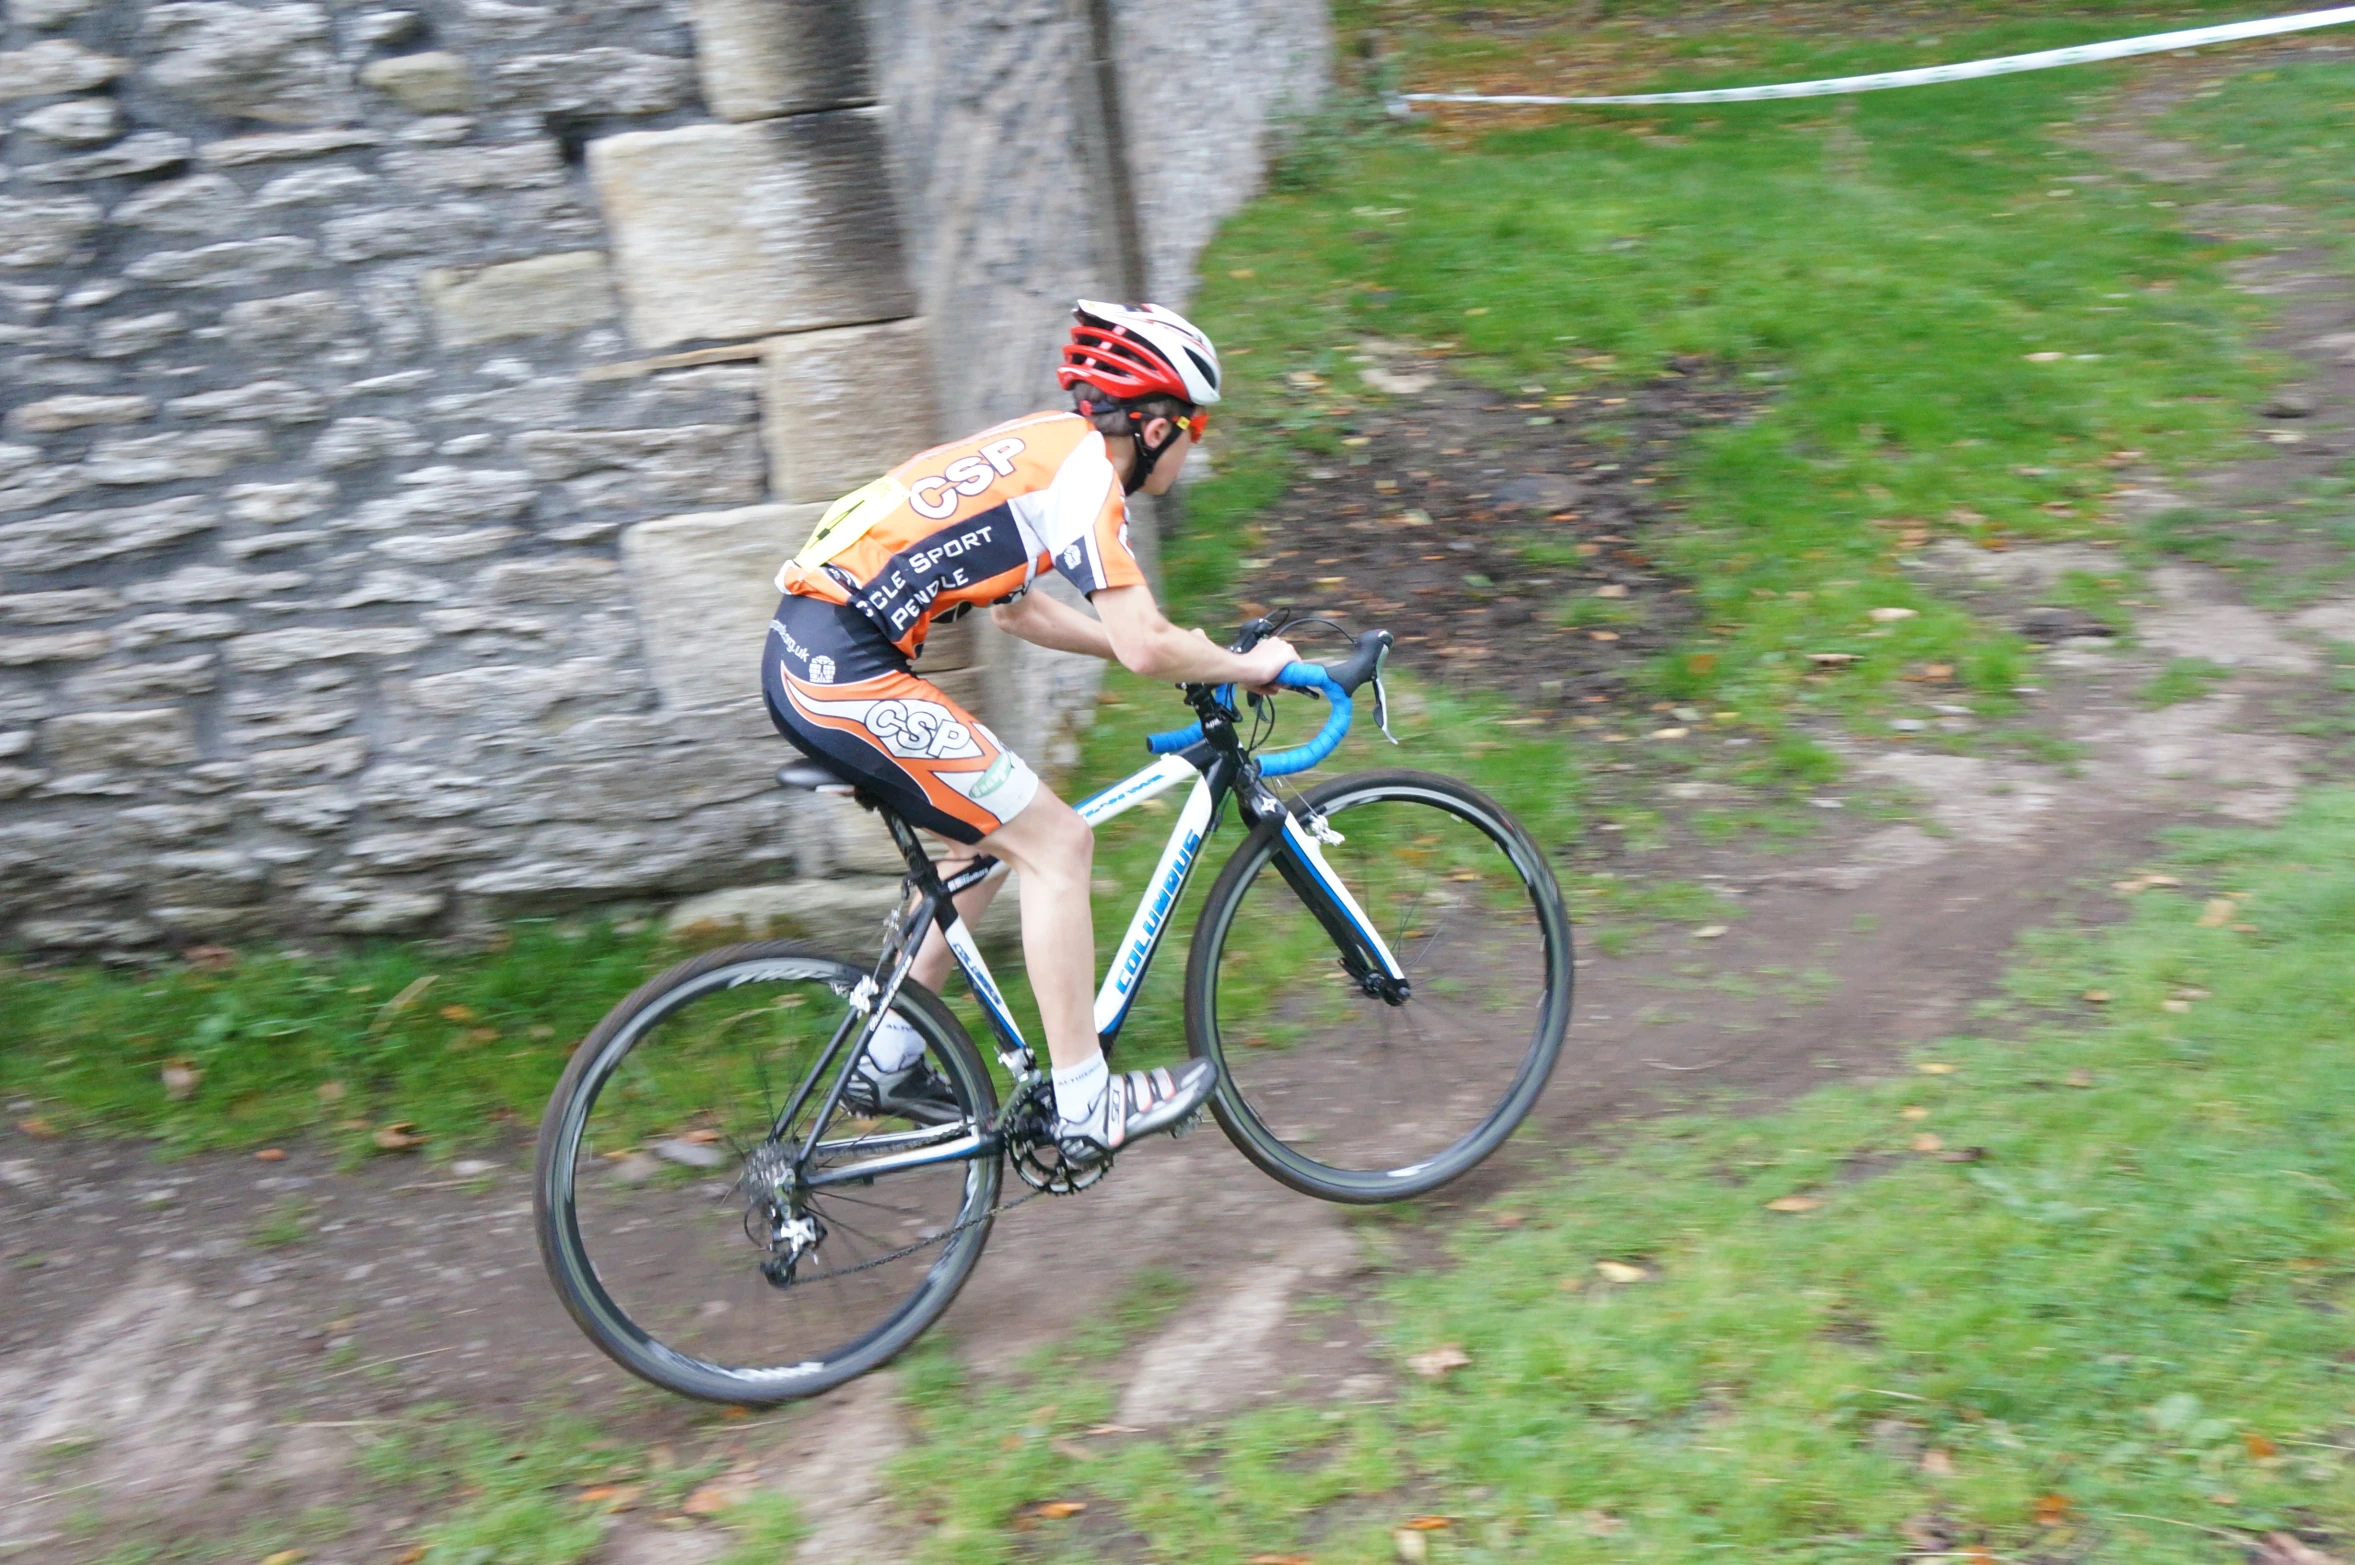 a bicyclist rides past a stone structure